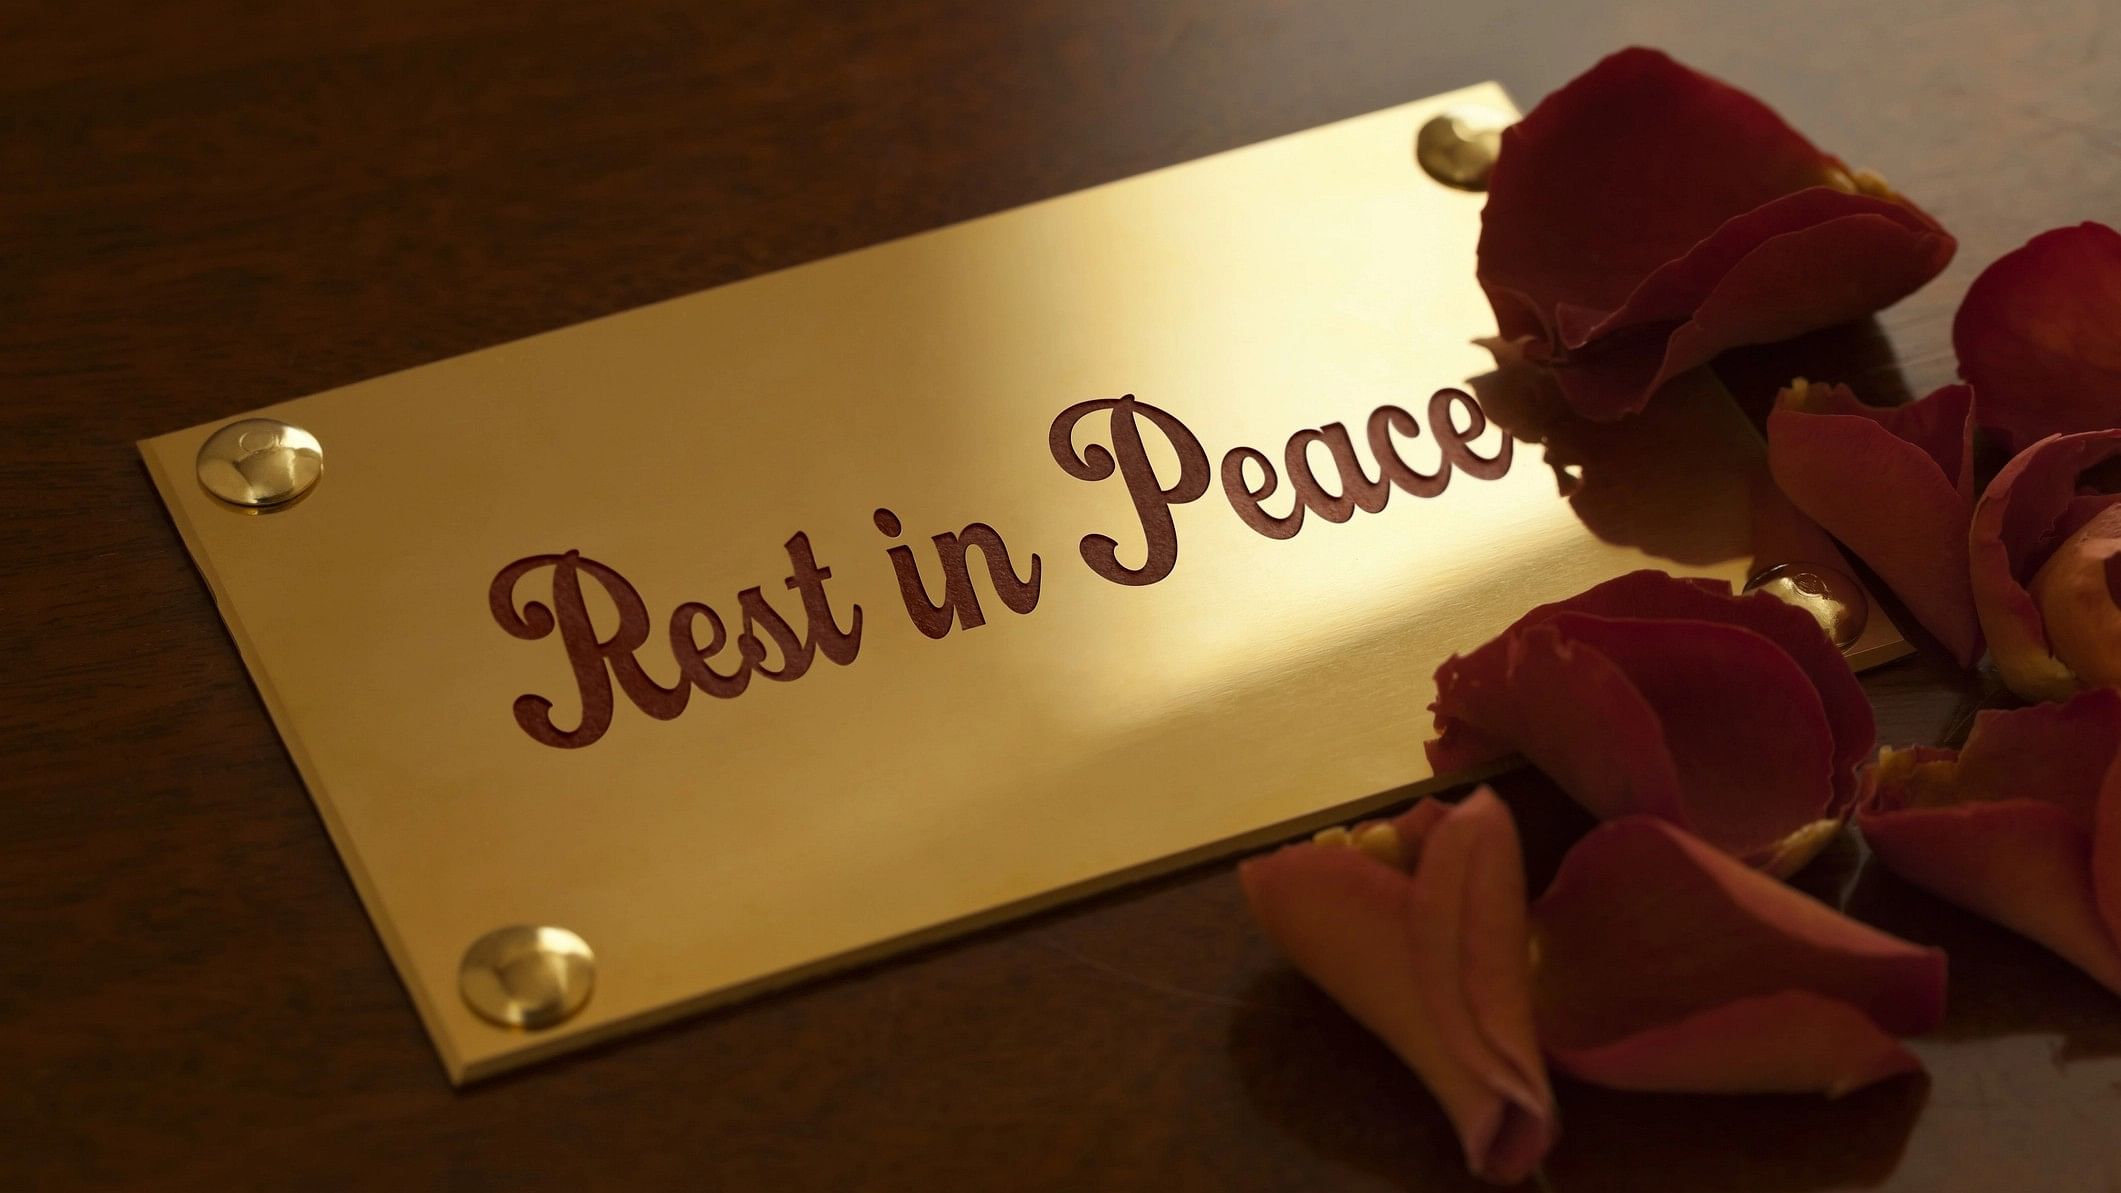 <div class="paragraphs"><p>Representative image of a plate reading 'Rest in Peace' as a mark of respect to the dead.</p></div>